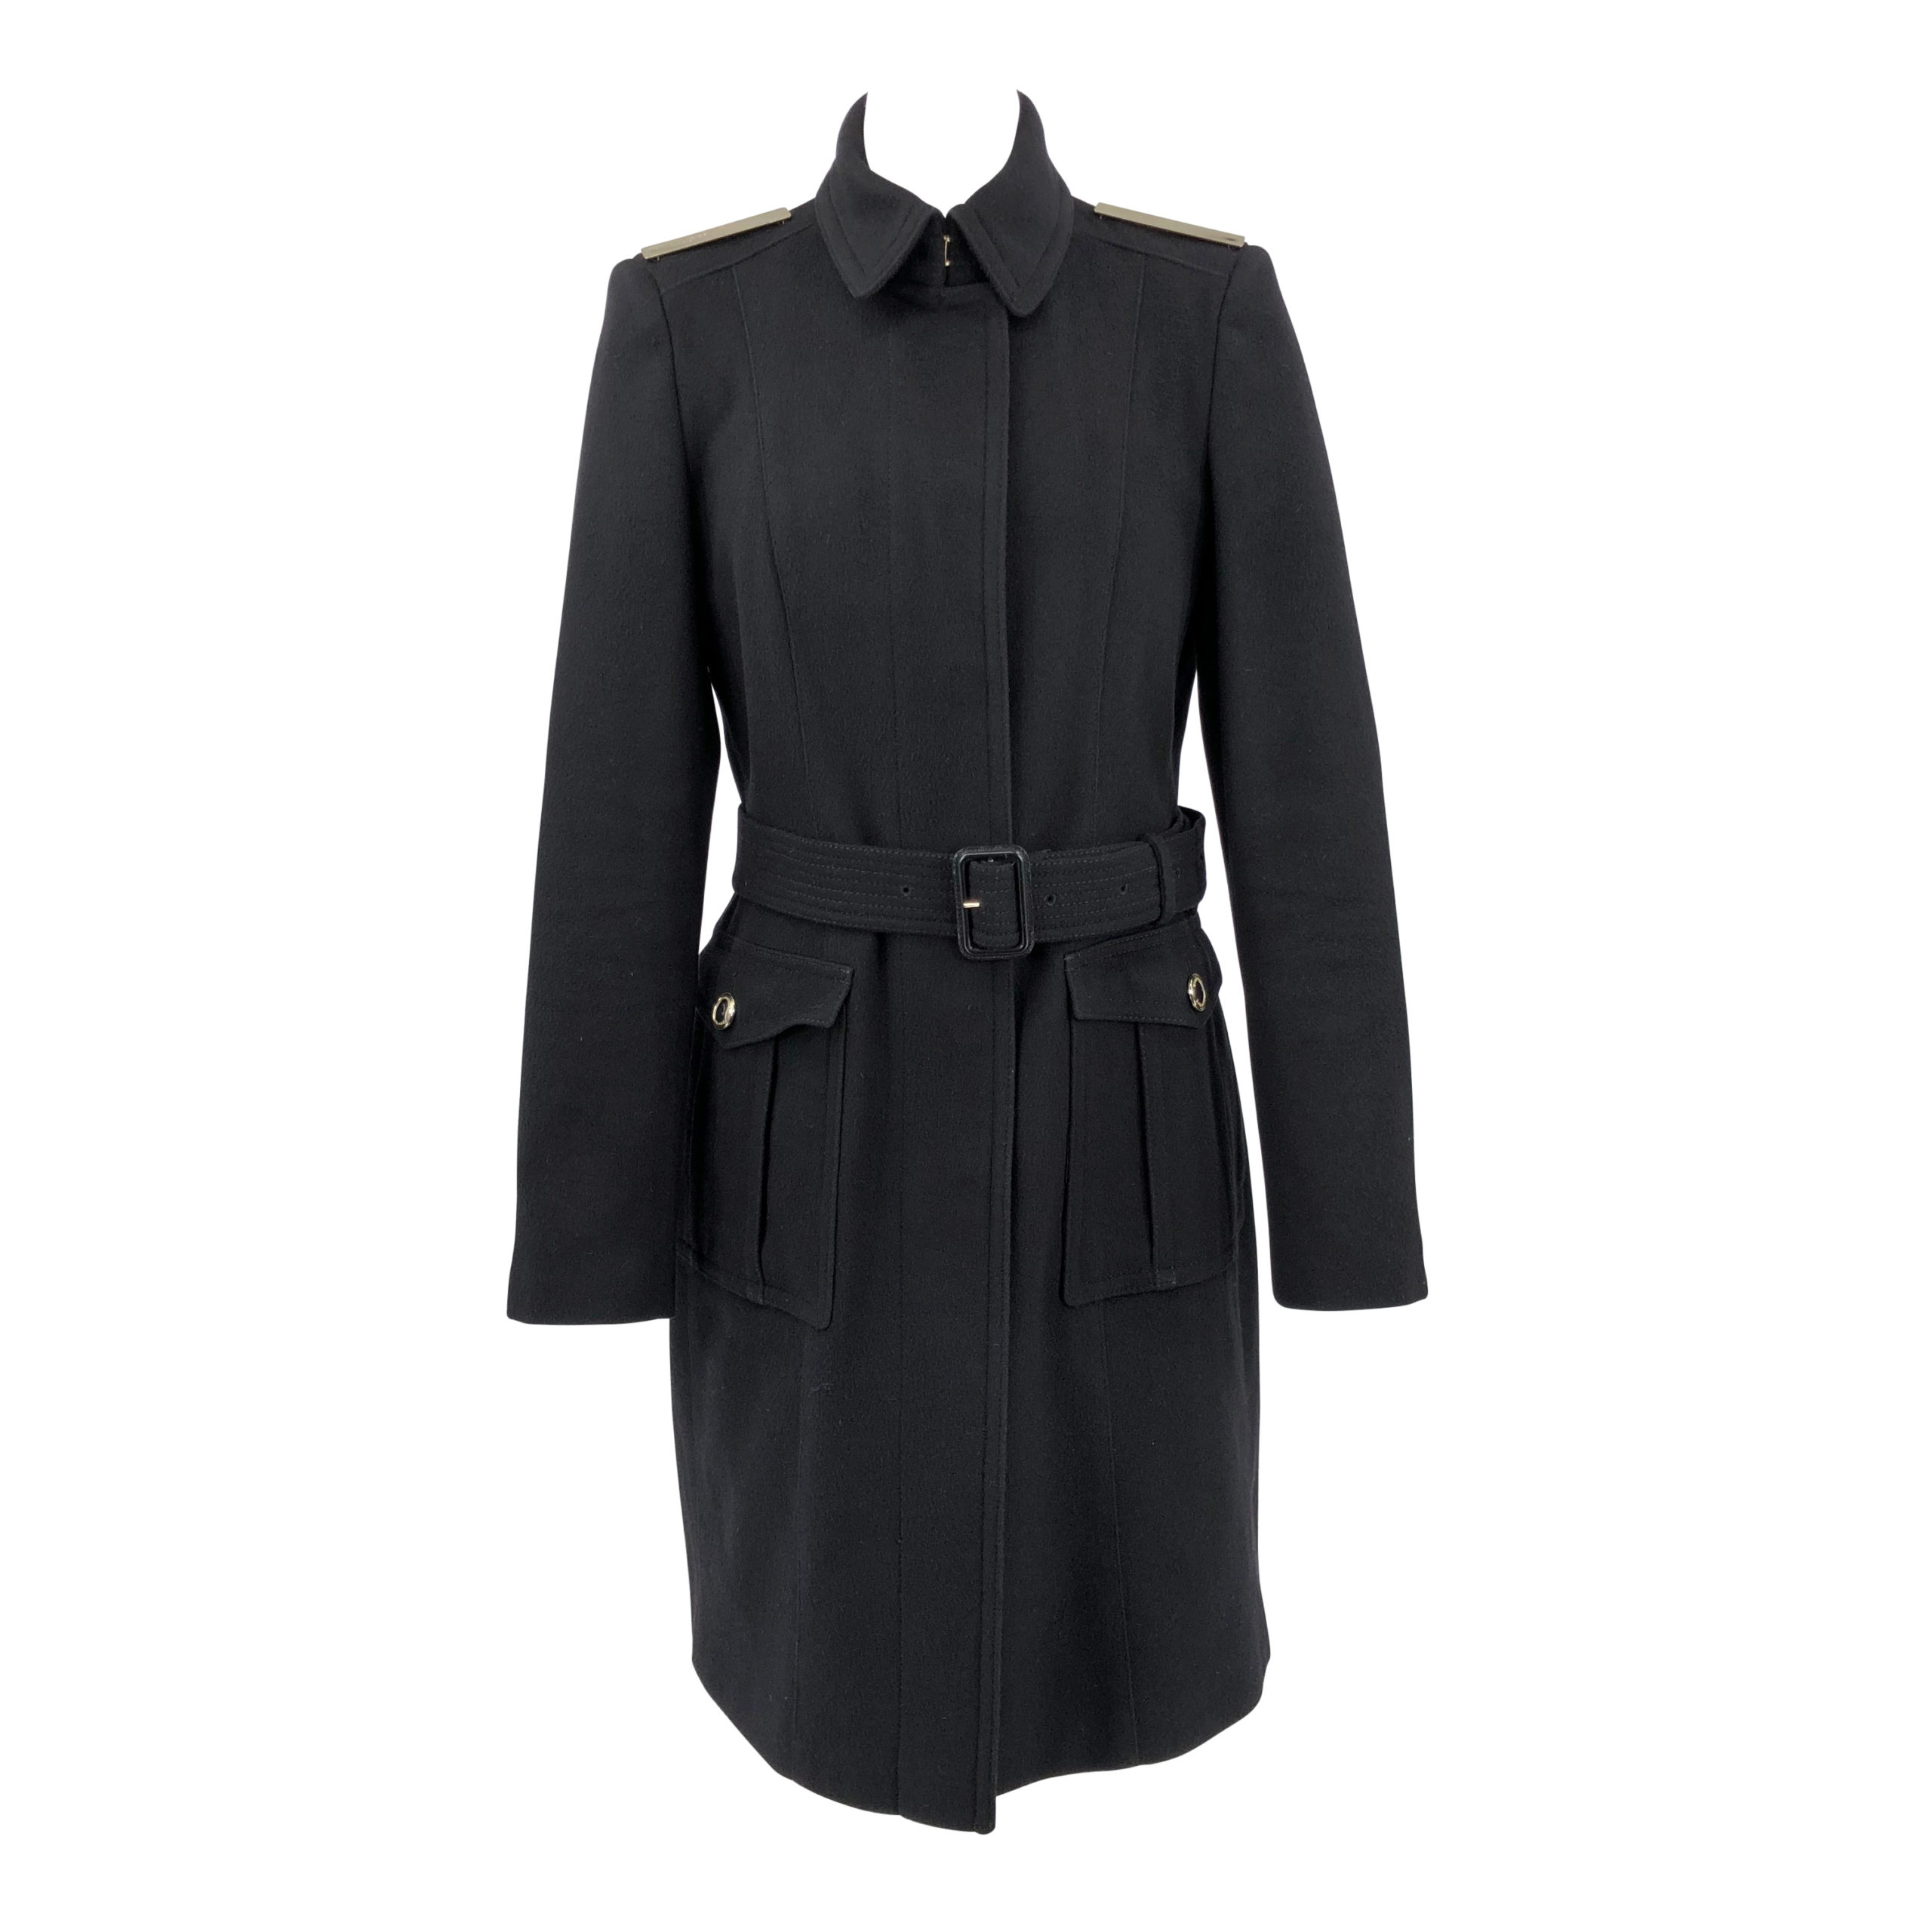 Burberry coat in black wool blend and gold-tone buttons - DOWNTOWN UPTOWN  Genève